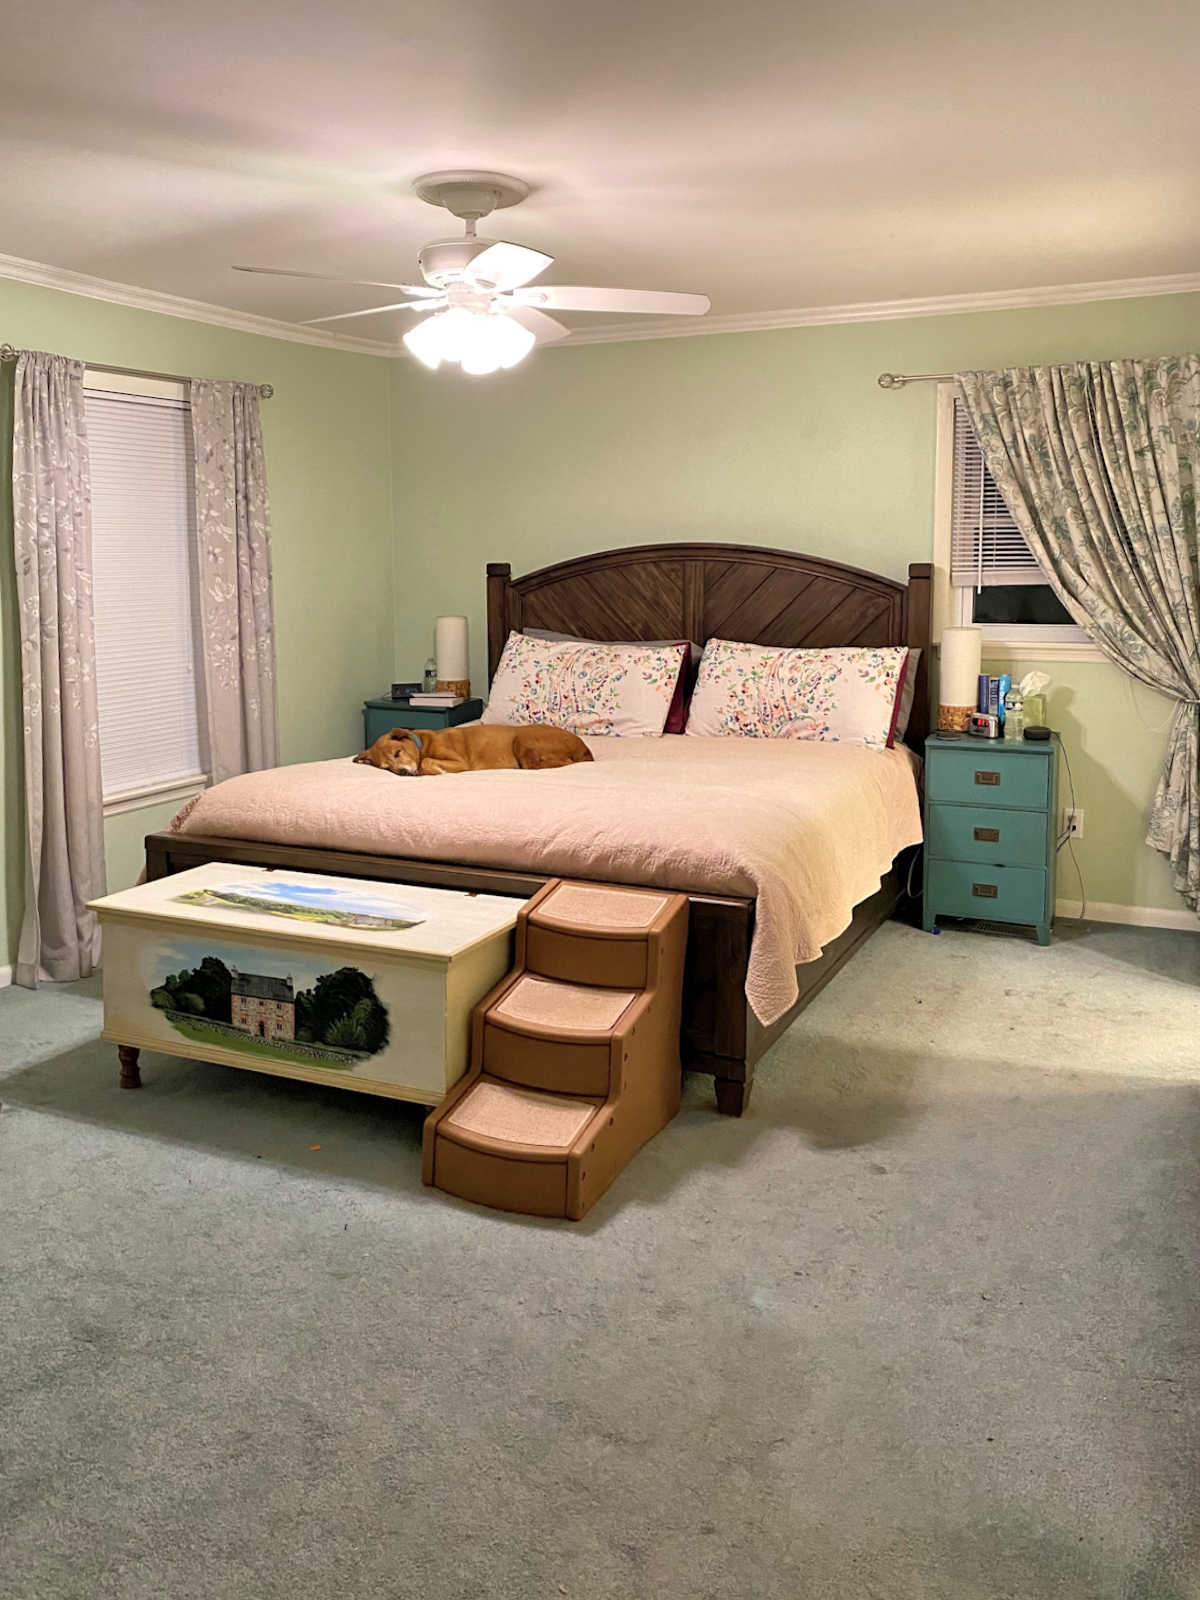 Reader Question: Where Do I Start With Decorating My Bedroom?